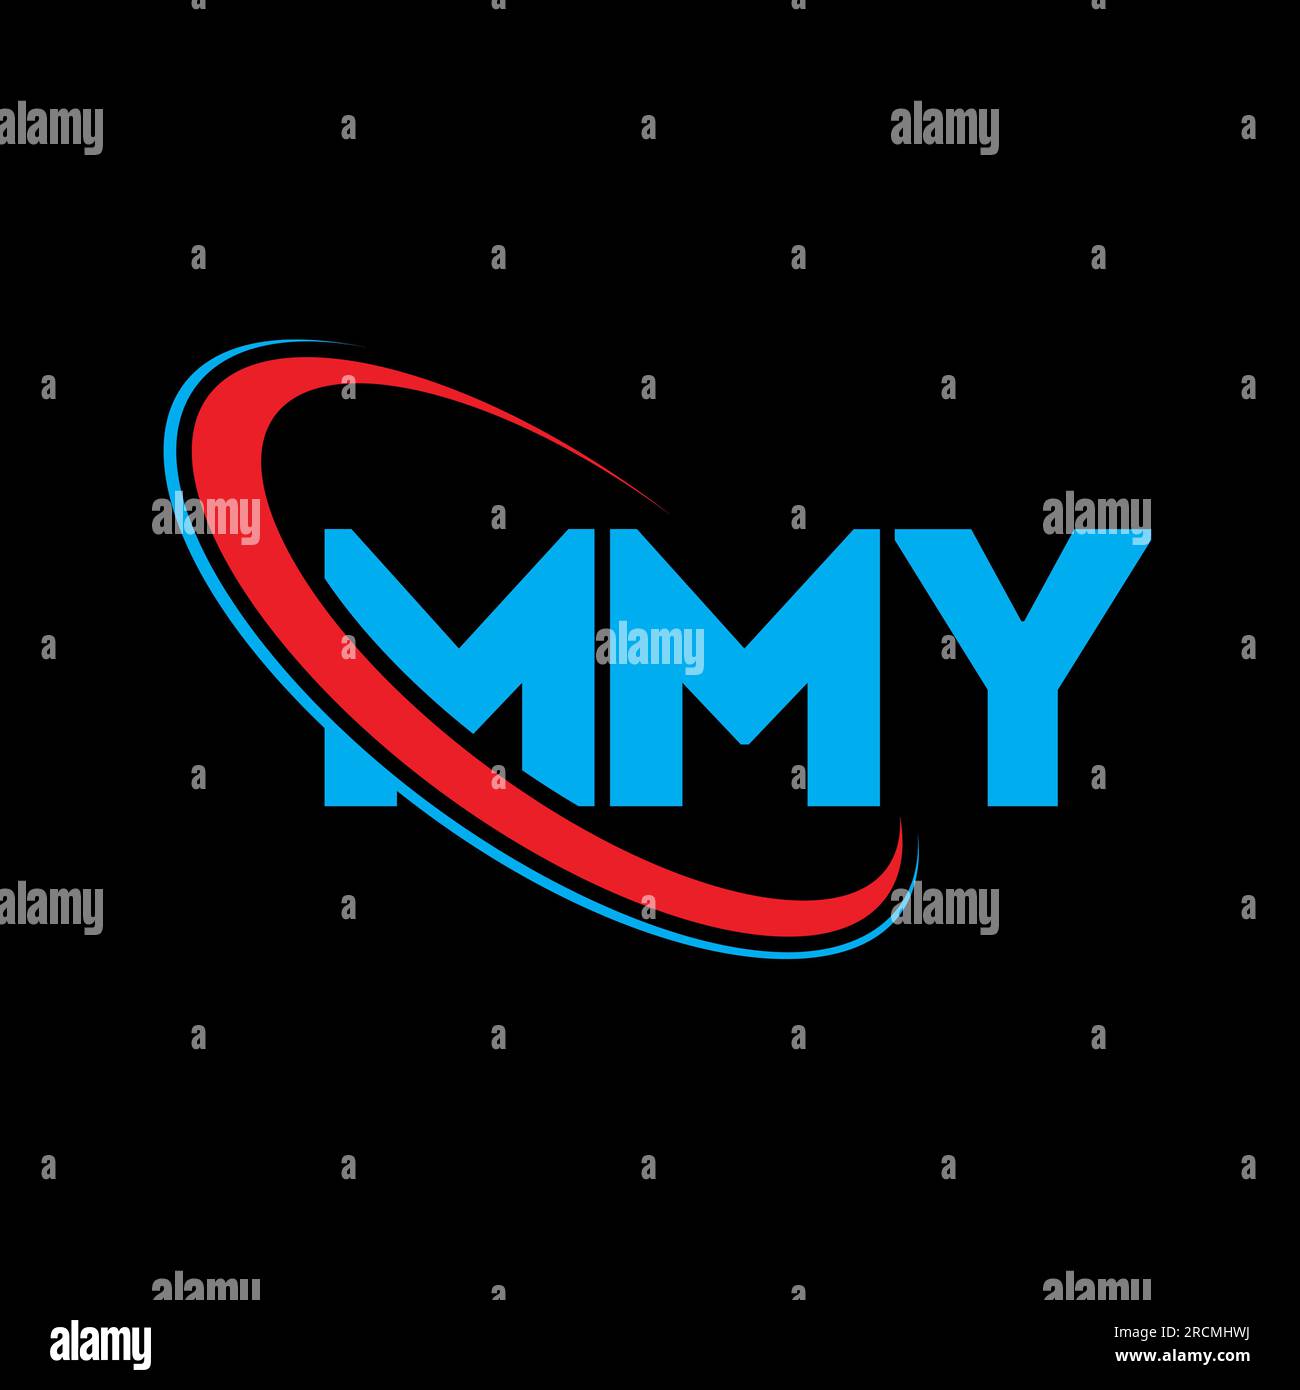 Mmy Stock Vector Images - Alamy